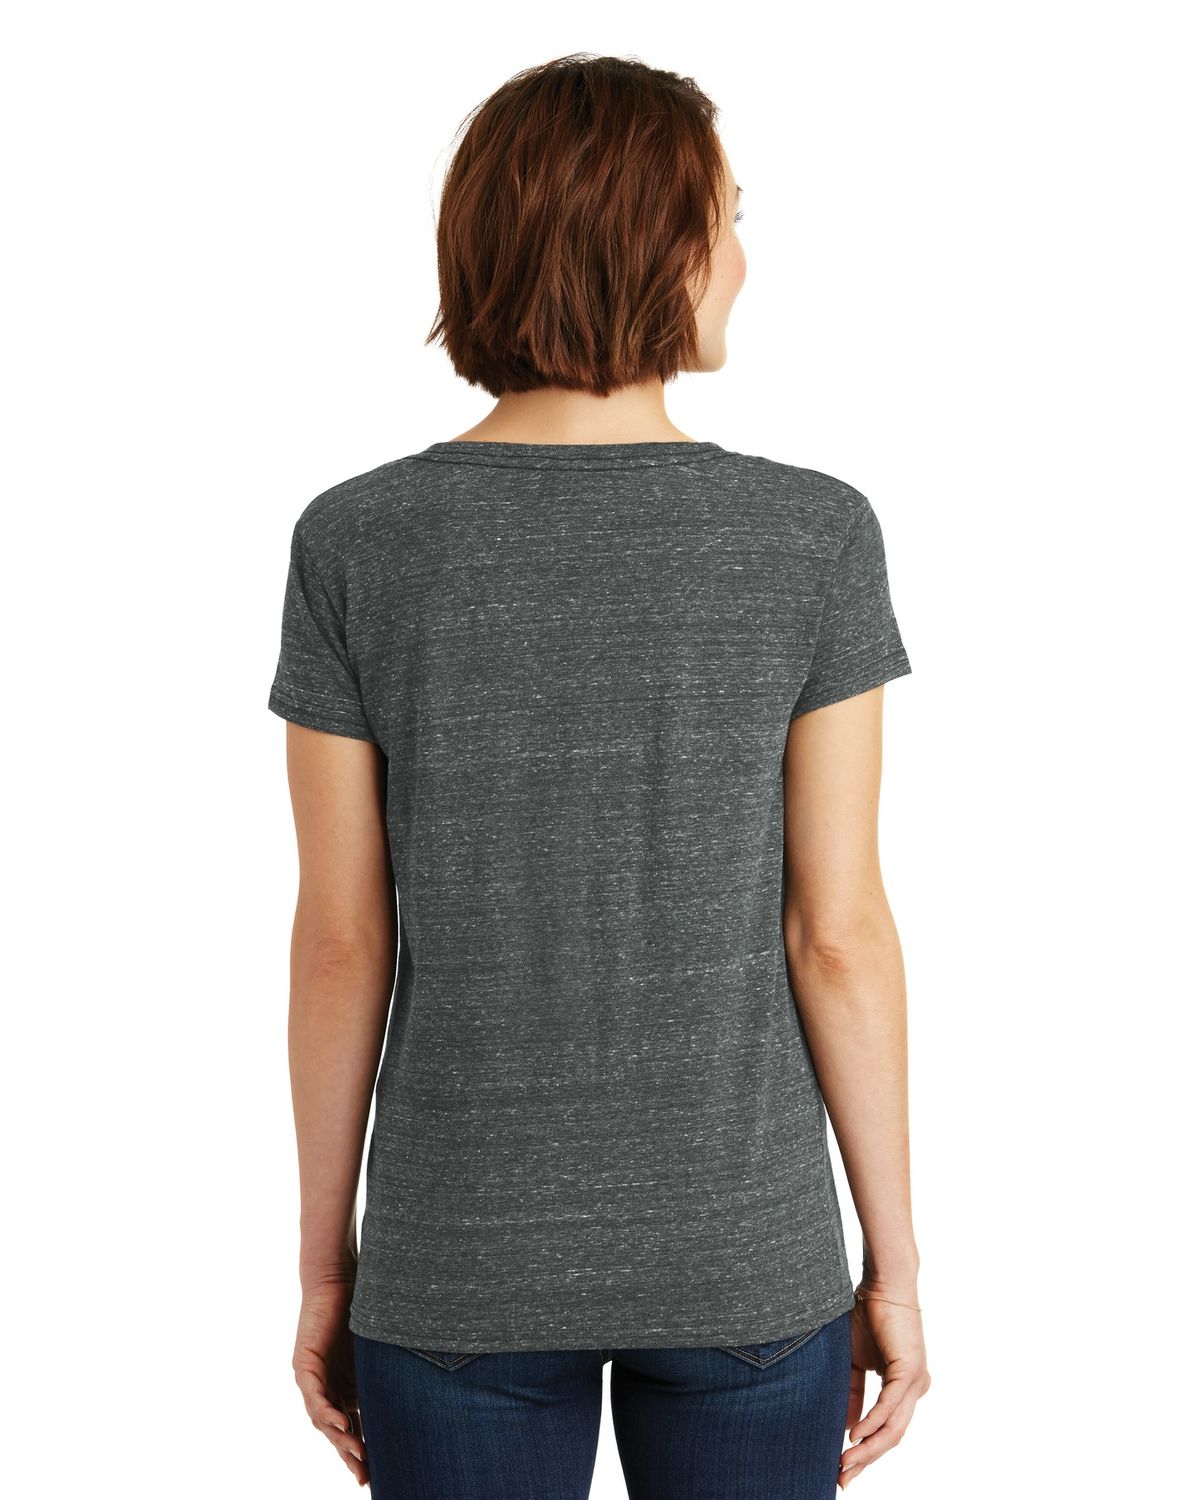 'District DM465 Ladies Cosmic Relaxed V-Neck Tee'